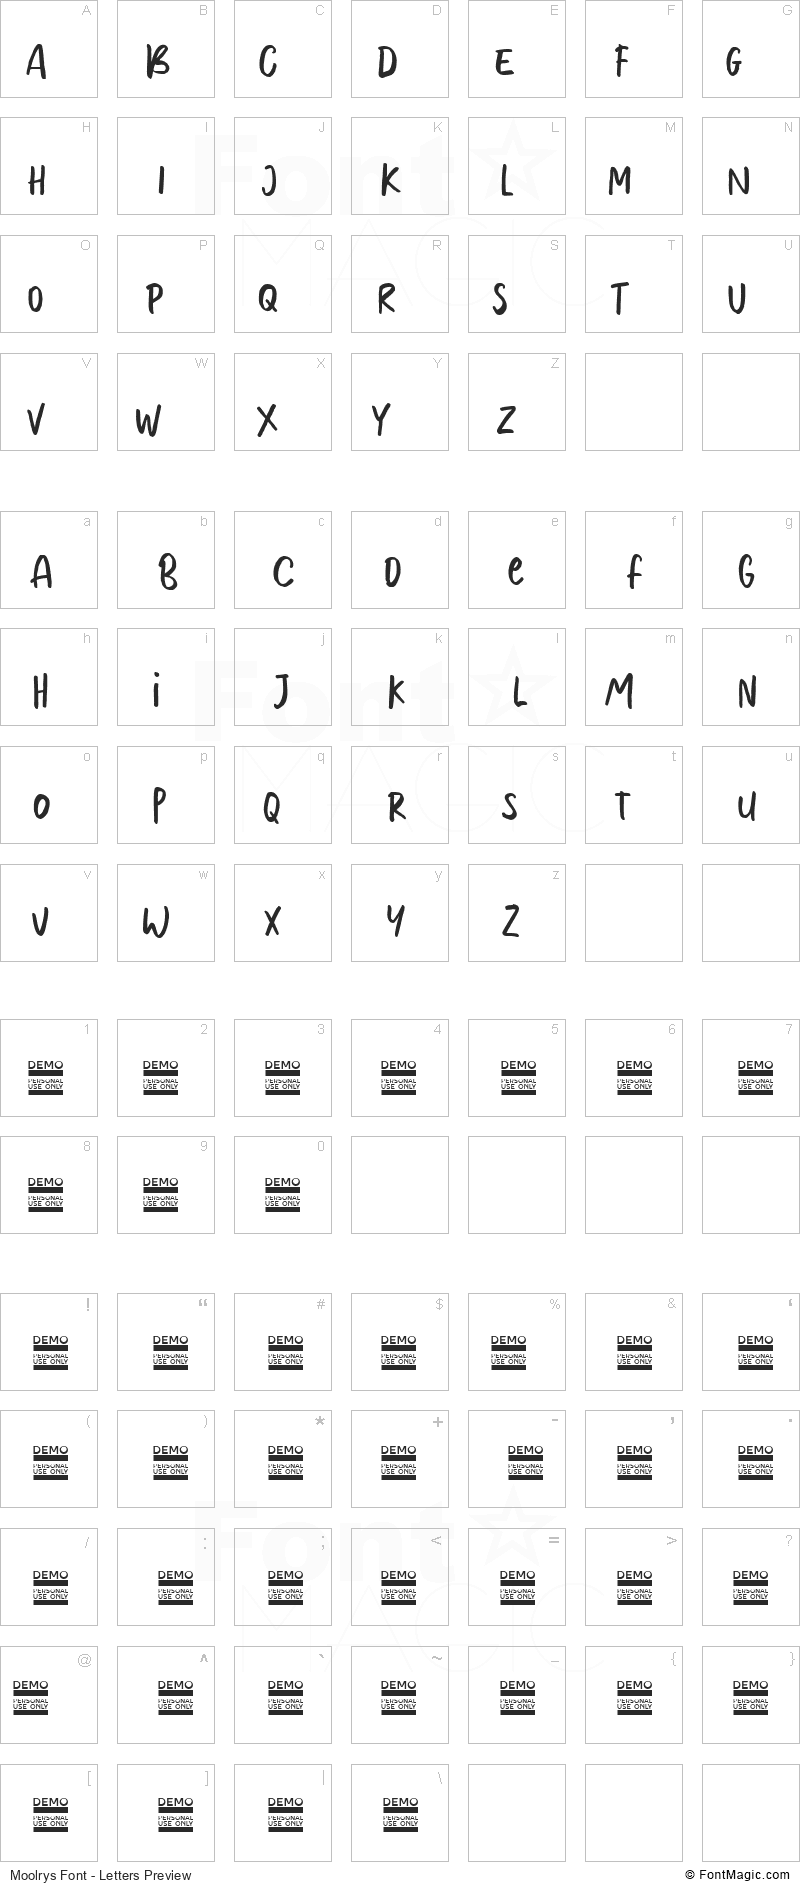 Moolrys Font - All Latters Preview Chart